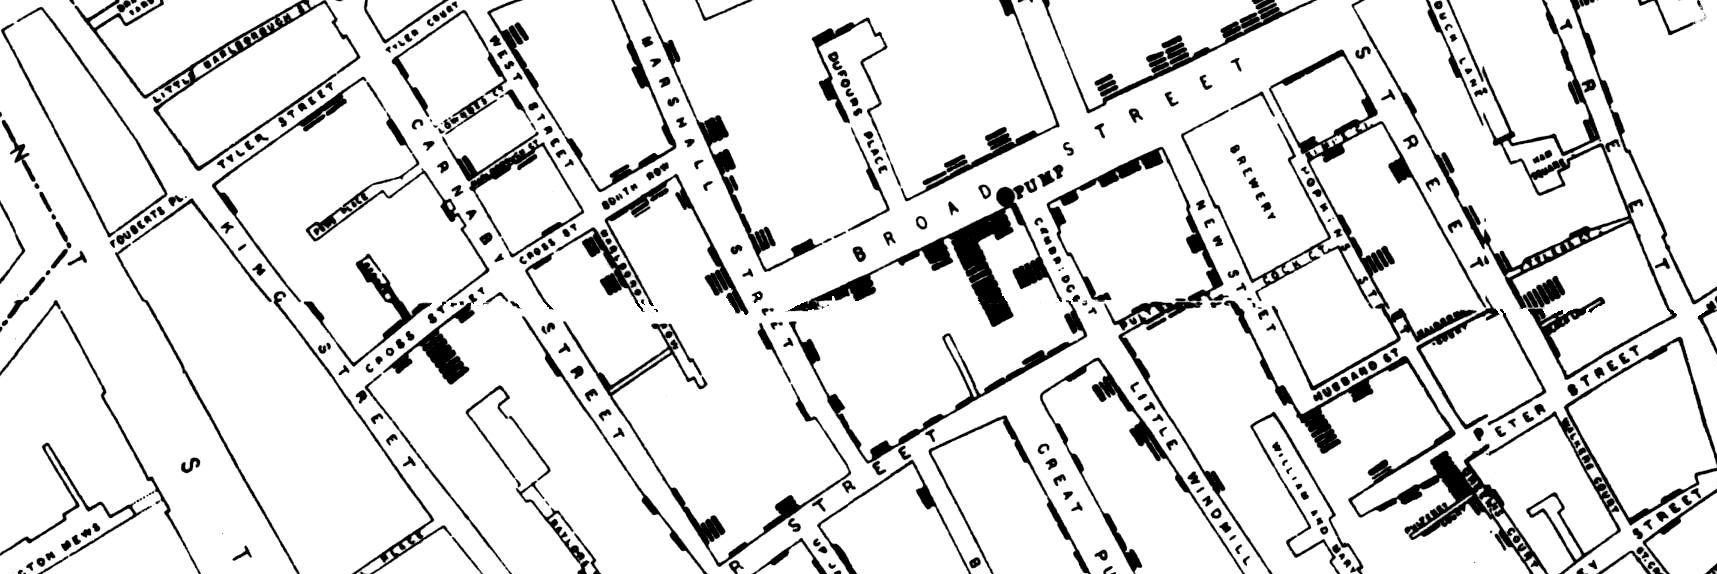 John Snow's 1855 map of the Soho cholera outbreak showed the clusters of cholera cases in the London epidemic of 1854.